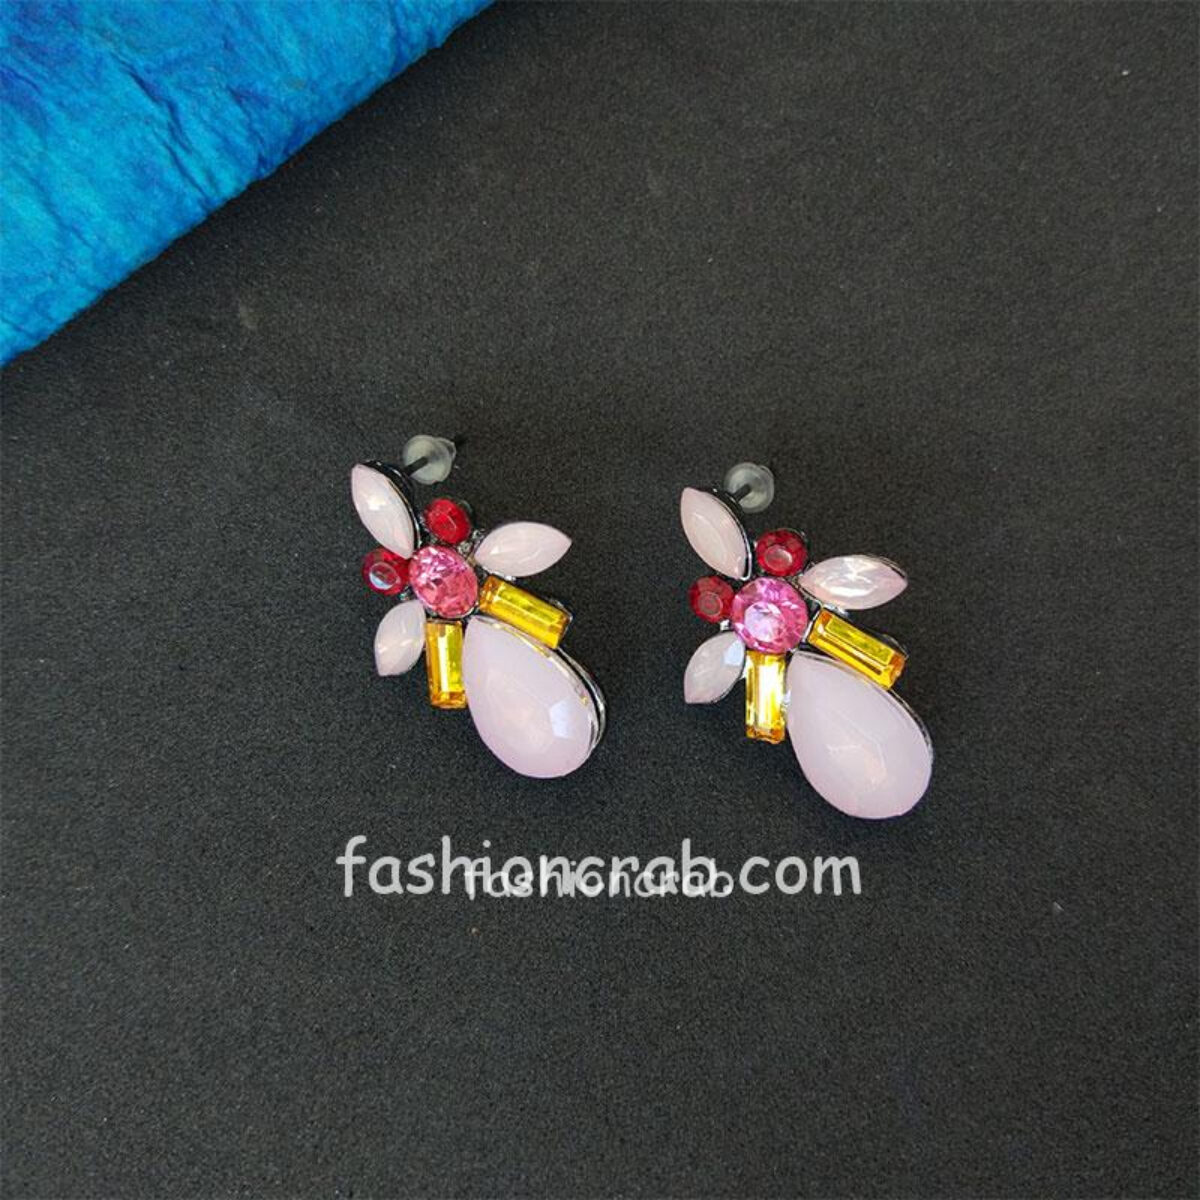 Flower Earrings Small Stud for Girls by FashionCrab® 